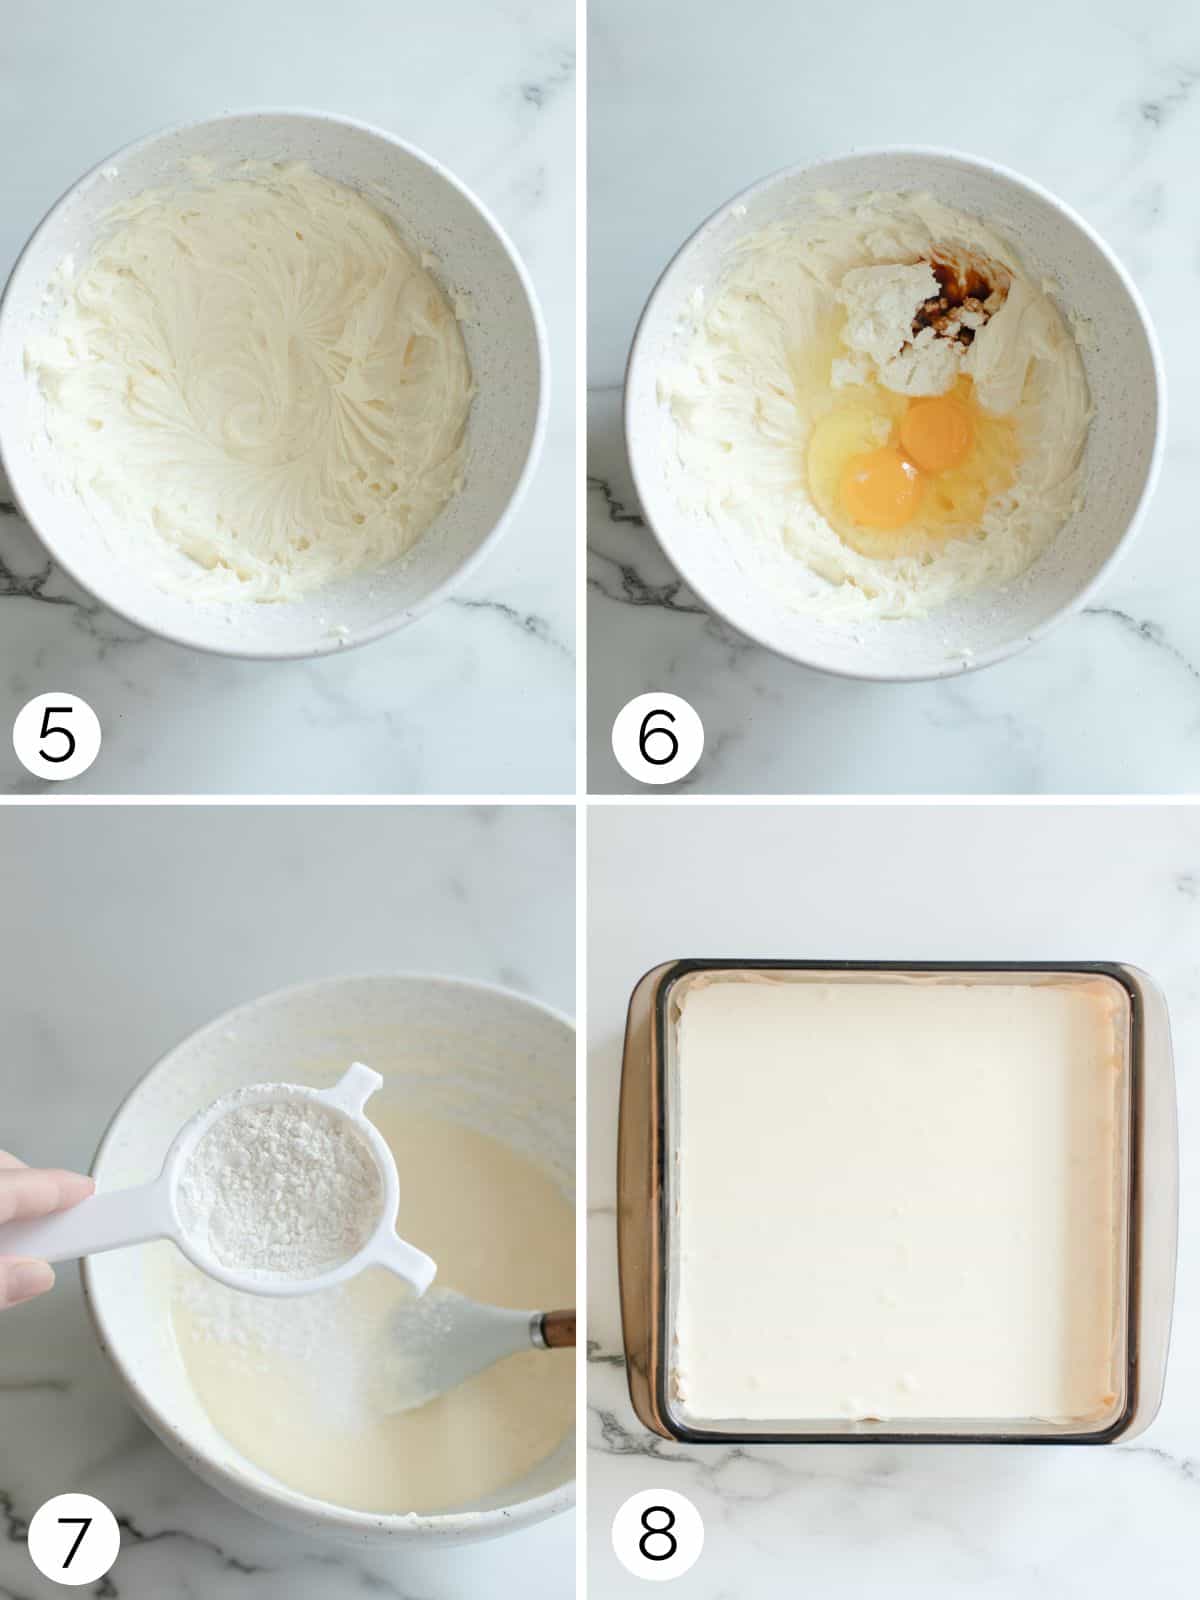 Step process for making whipped cheesecake filling.